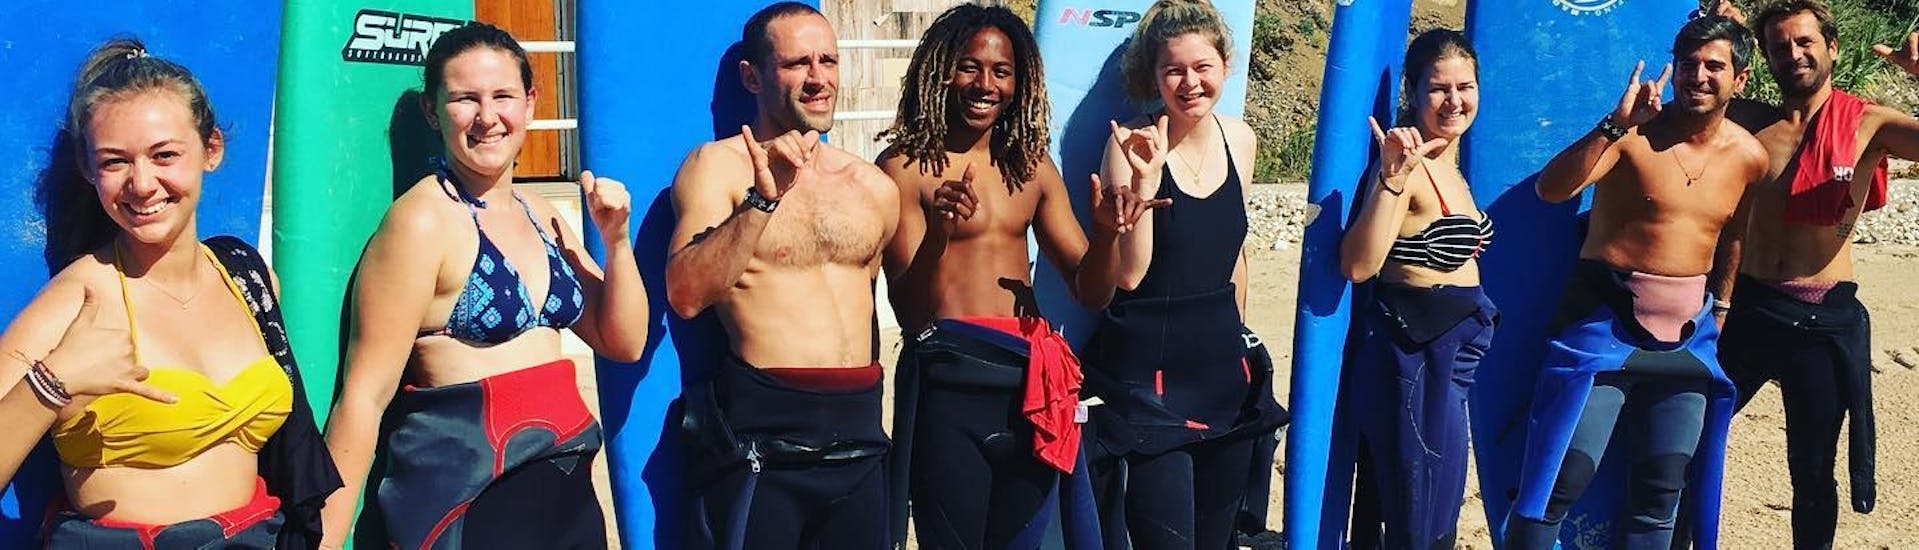 A group of aspiring surfers is posing for a photo alongside their surf instructors from Lisbon Surfaris before they get started with their private surfing lessons on Carcavelos Beach near Lisbon.